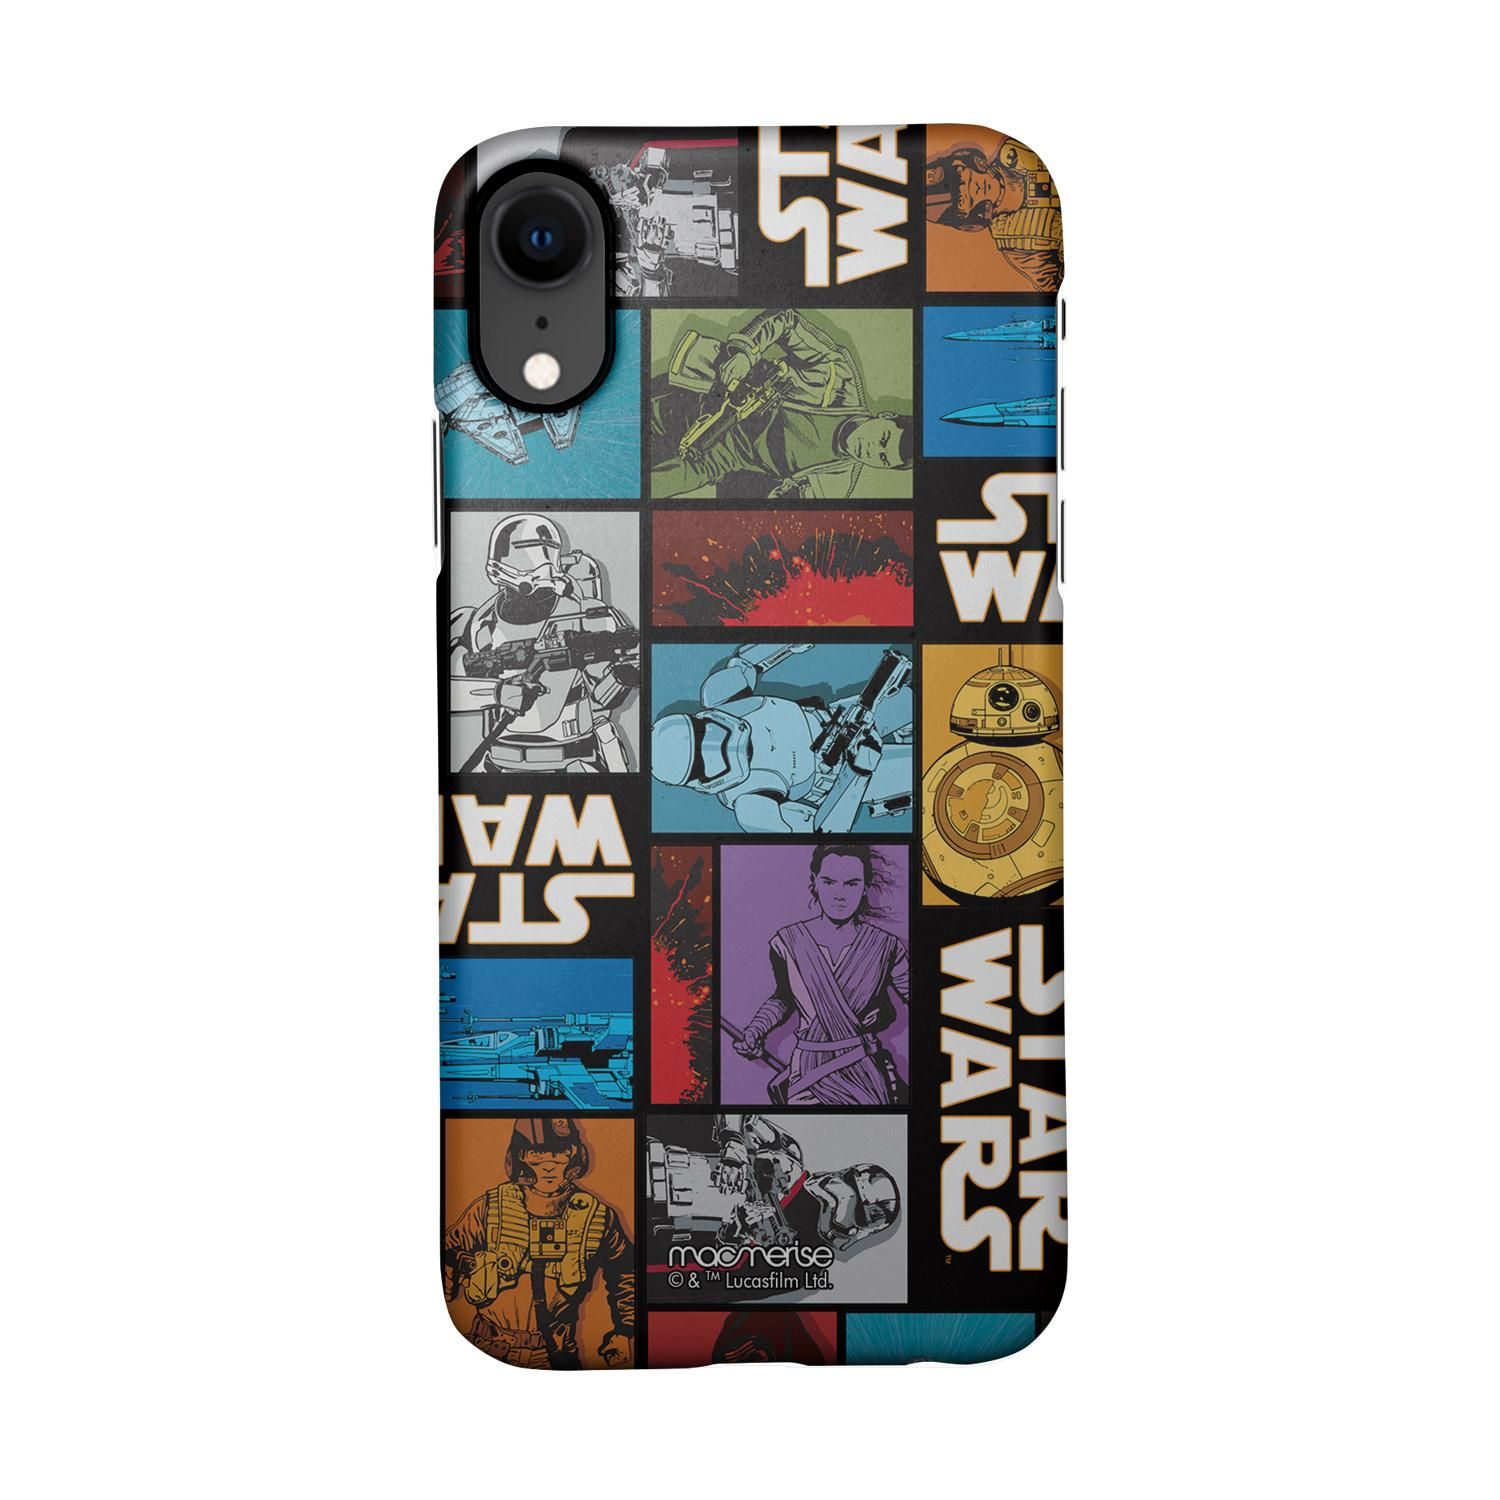 Buy The Force Awakens - Sleek Phone Case for iPhone XR Online